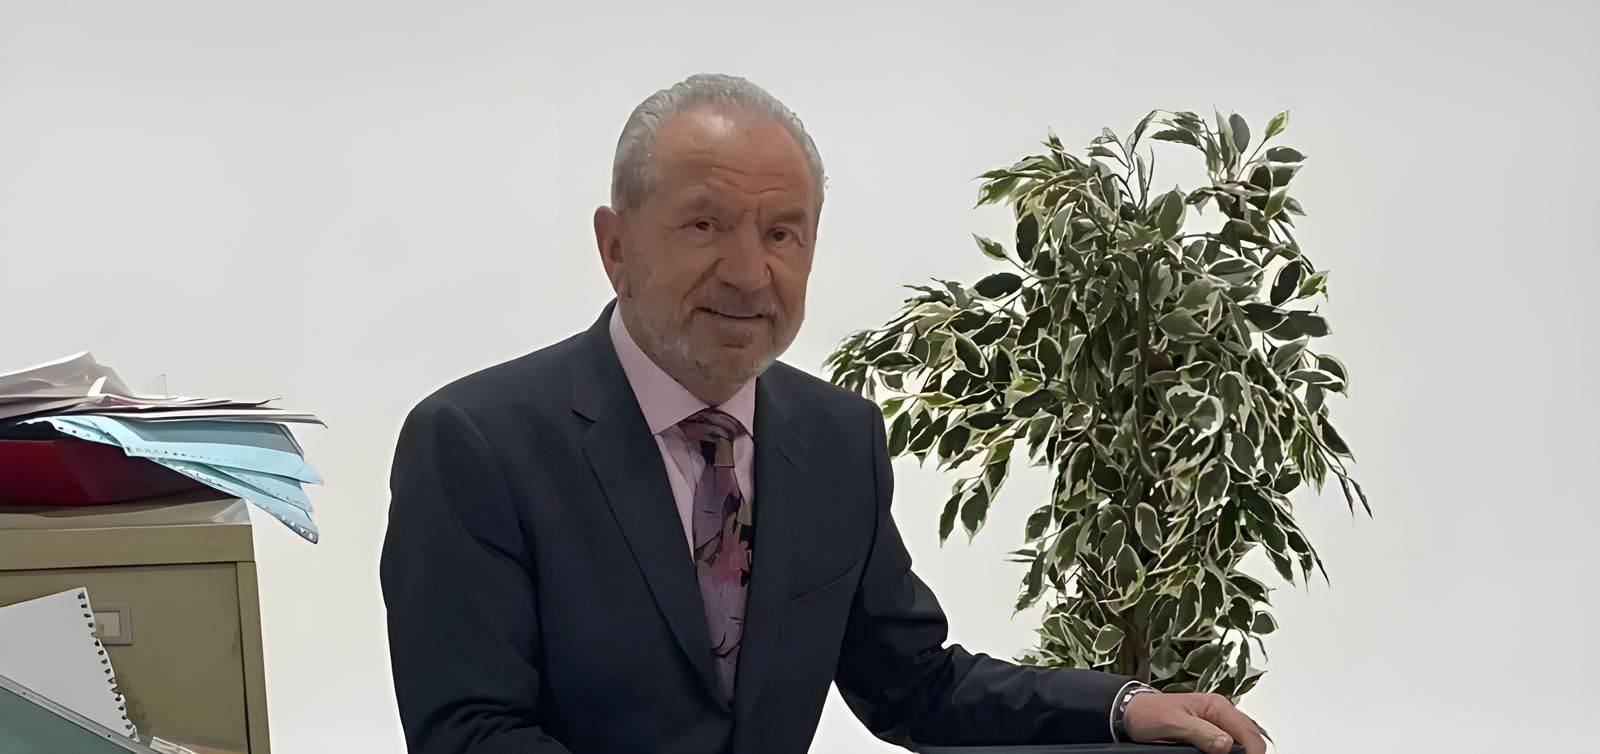 Lord Sugar states that he will not ever get any cosmetic surgery (Image via @lord_sugar/Instagram)